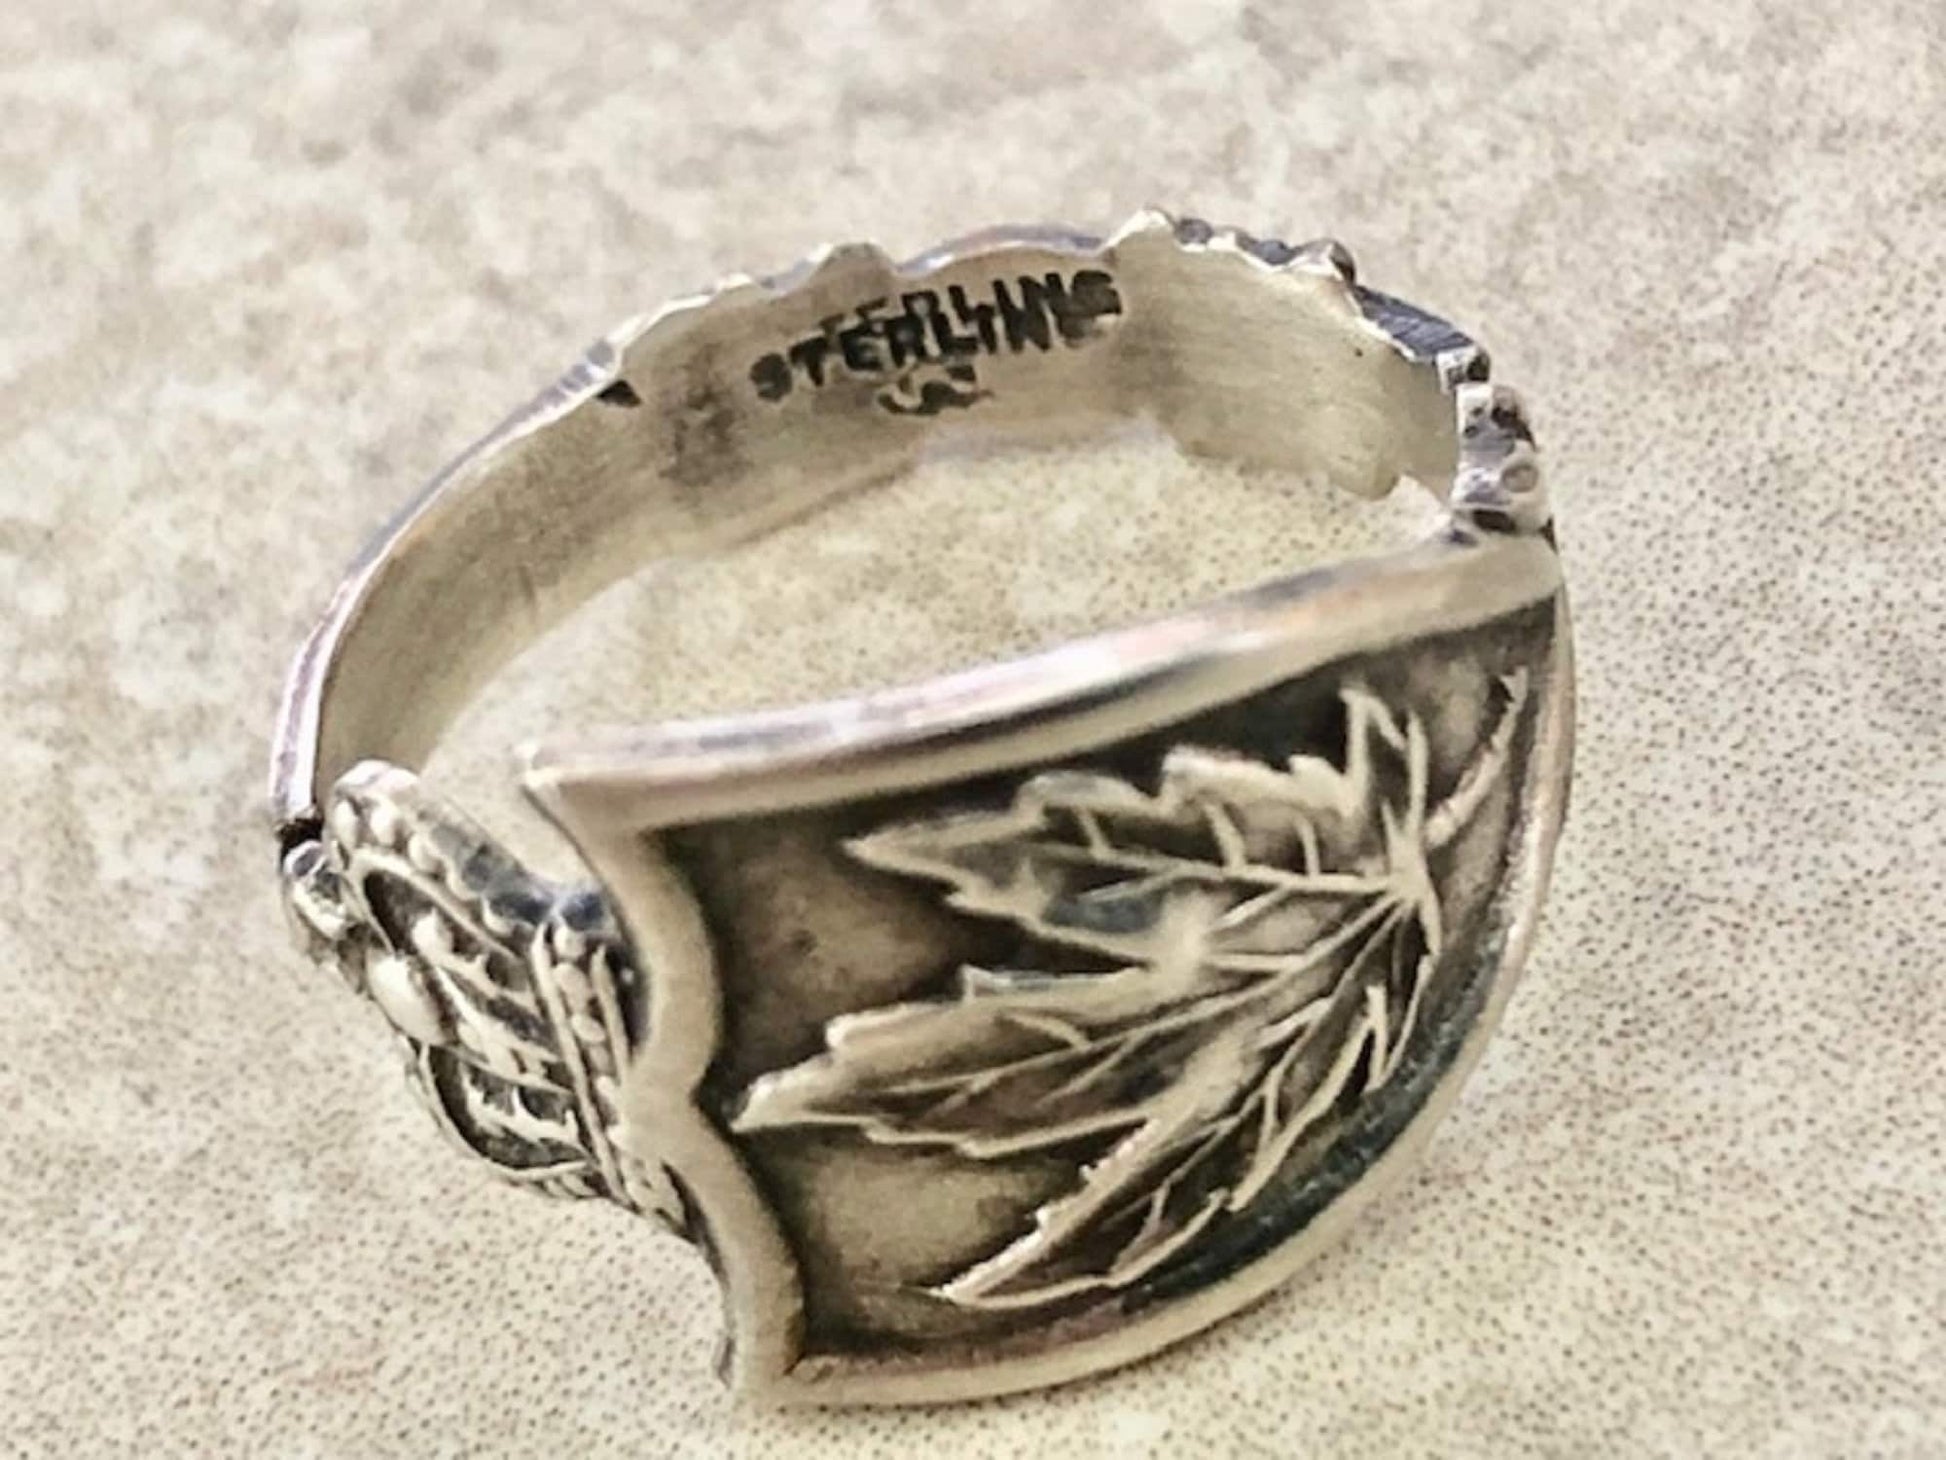 Victorian 925 Sterling Silver Maple Leaf Spoon Ring, Classic Vintage Silverware Jewelry, Wrapped Spoon, Love Balance Longevity, Handmade